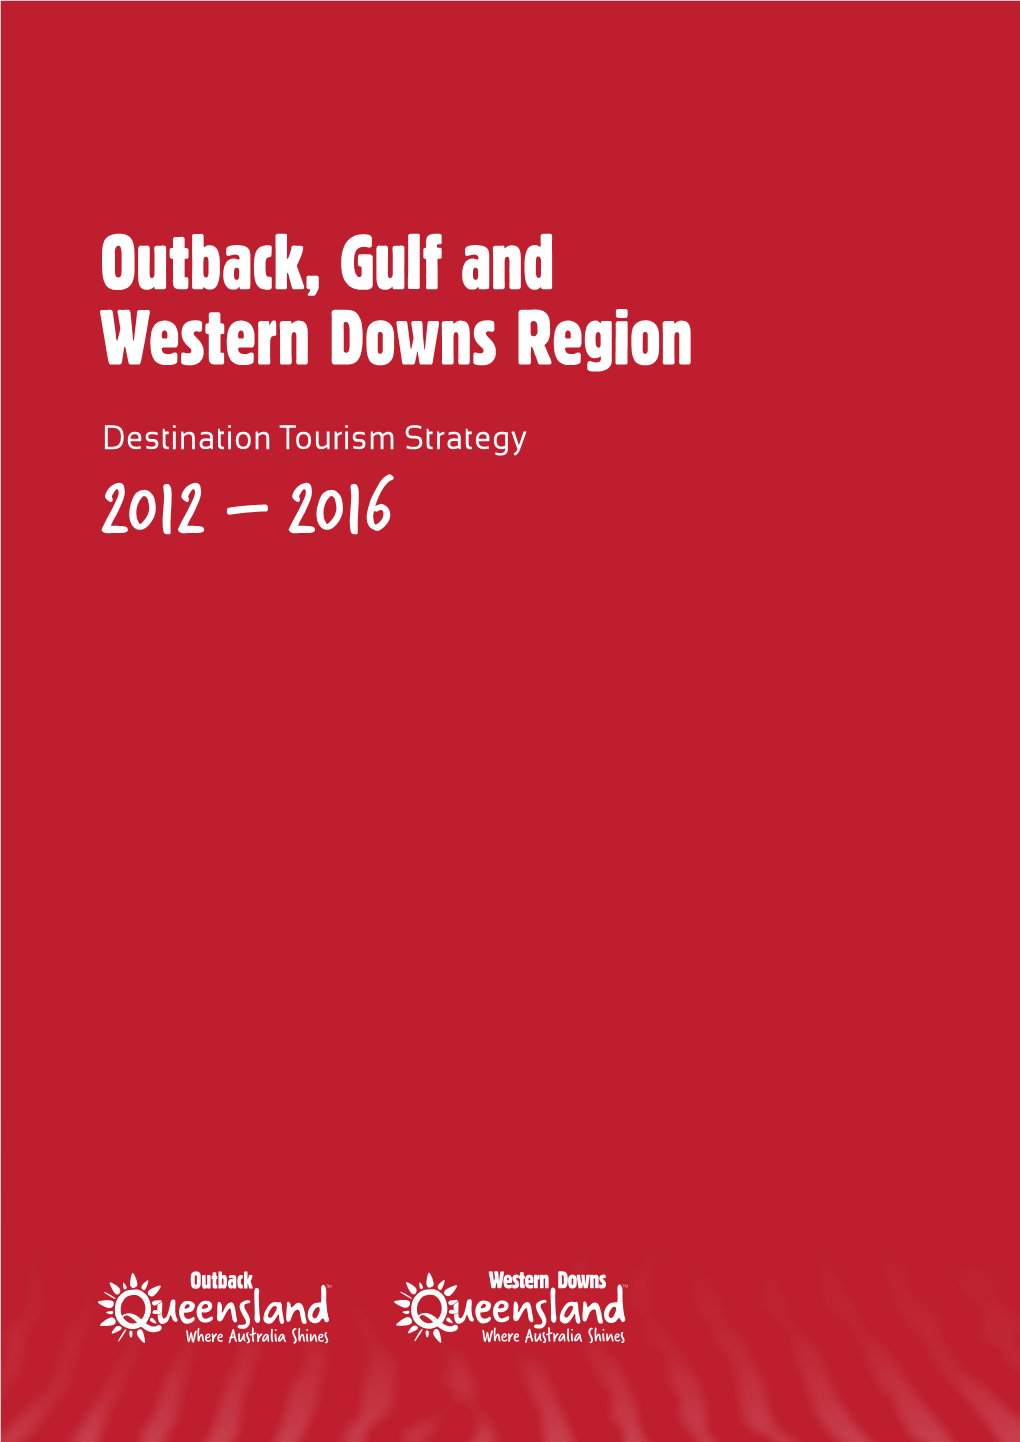 Outback, Gulf and Western Downs Region